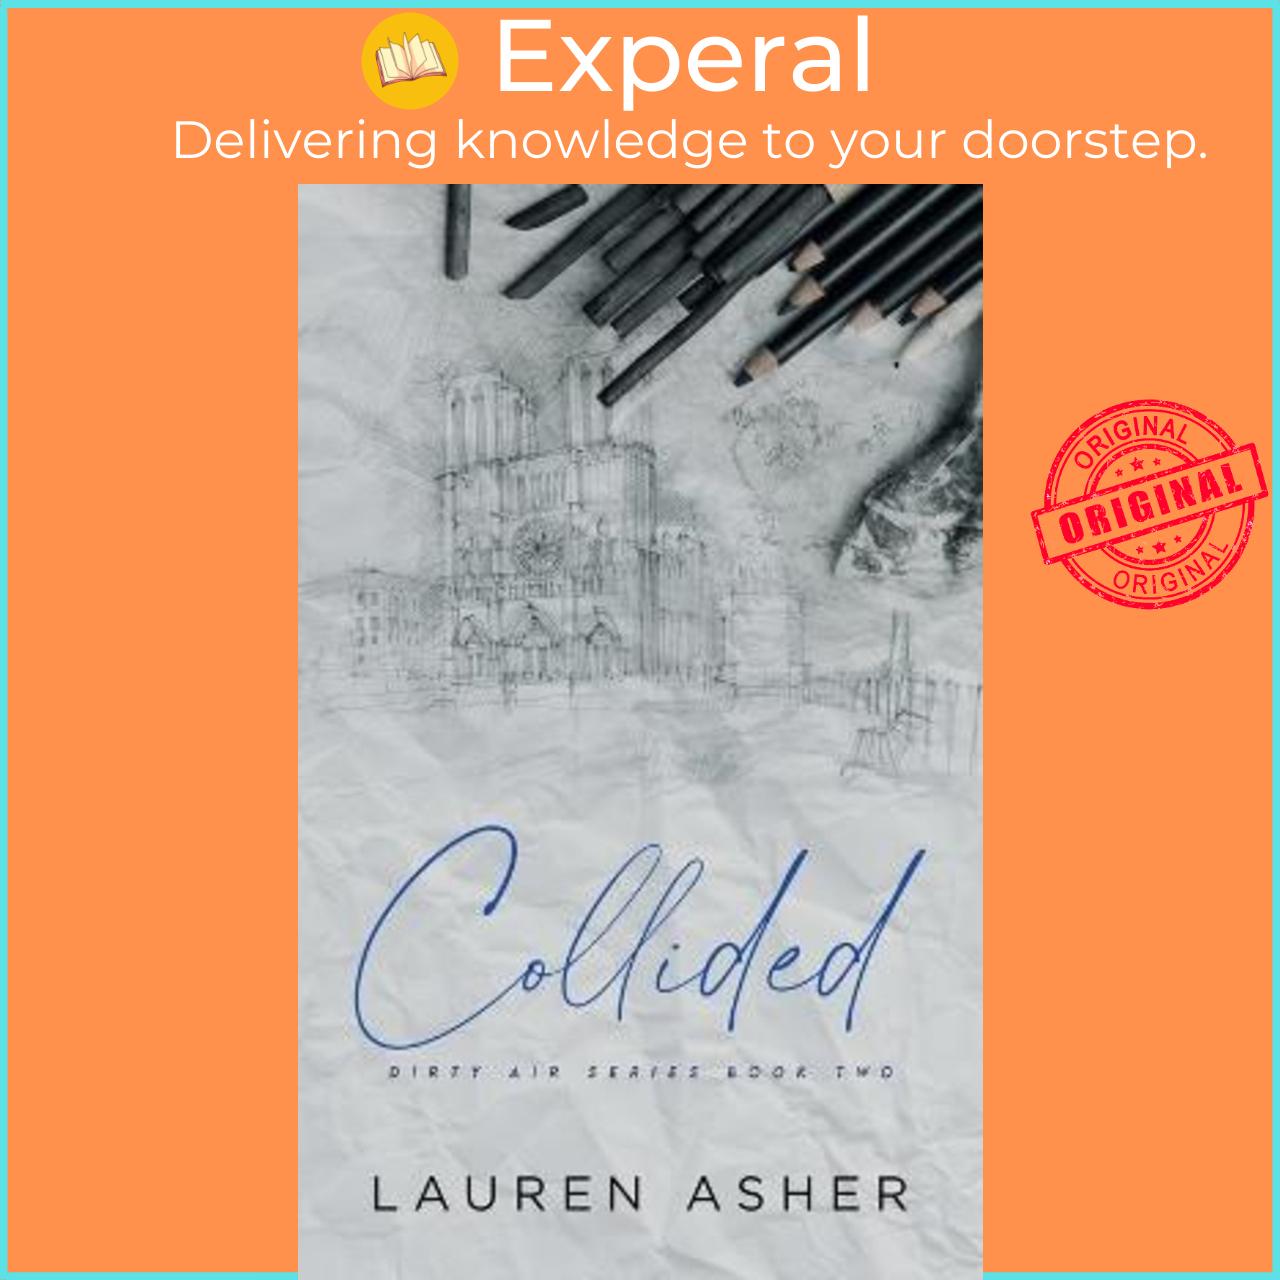 Sách - Collided Special Edition by Lauren Asher (US edition, paperback)